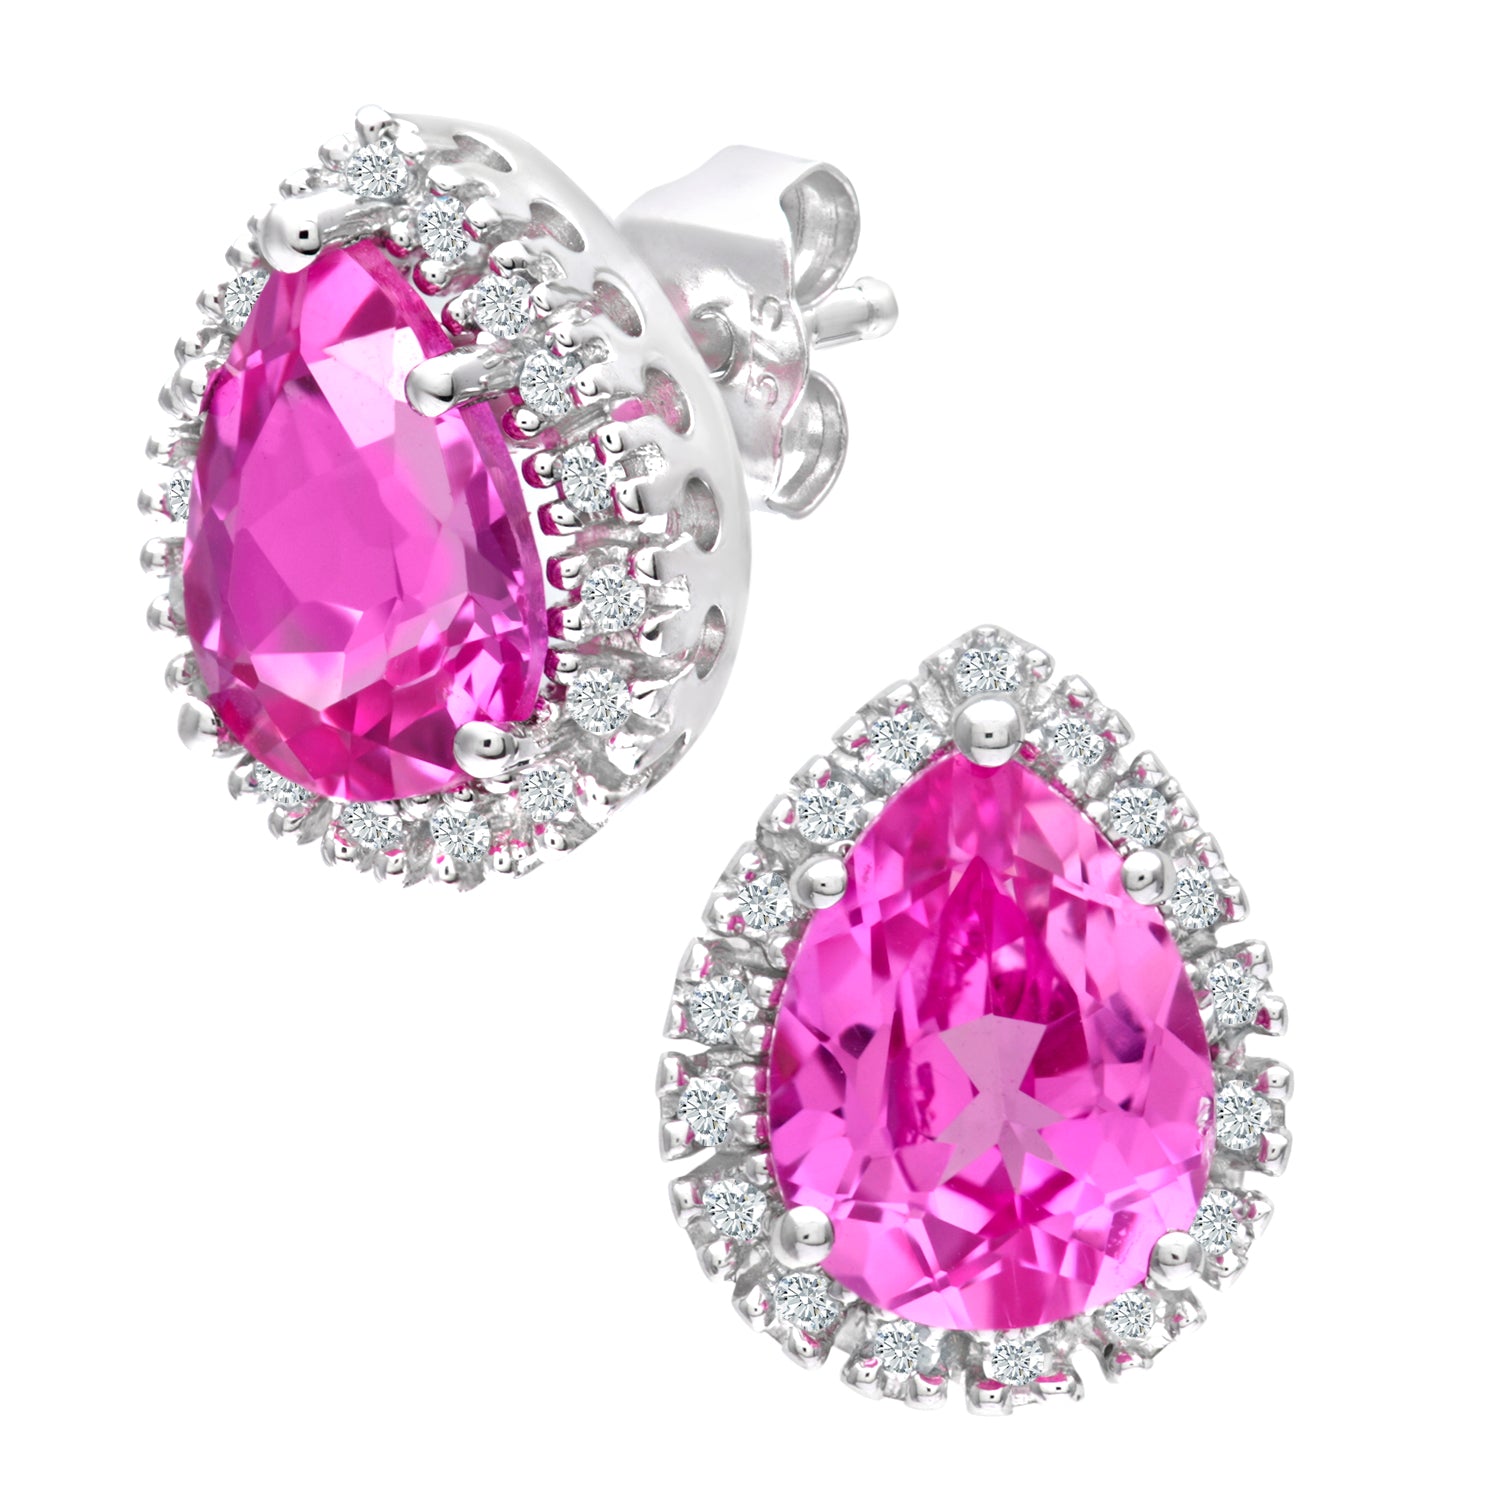 Simplicity Pear Shaped Pink Sapphire and Diamond Halo Stud